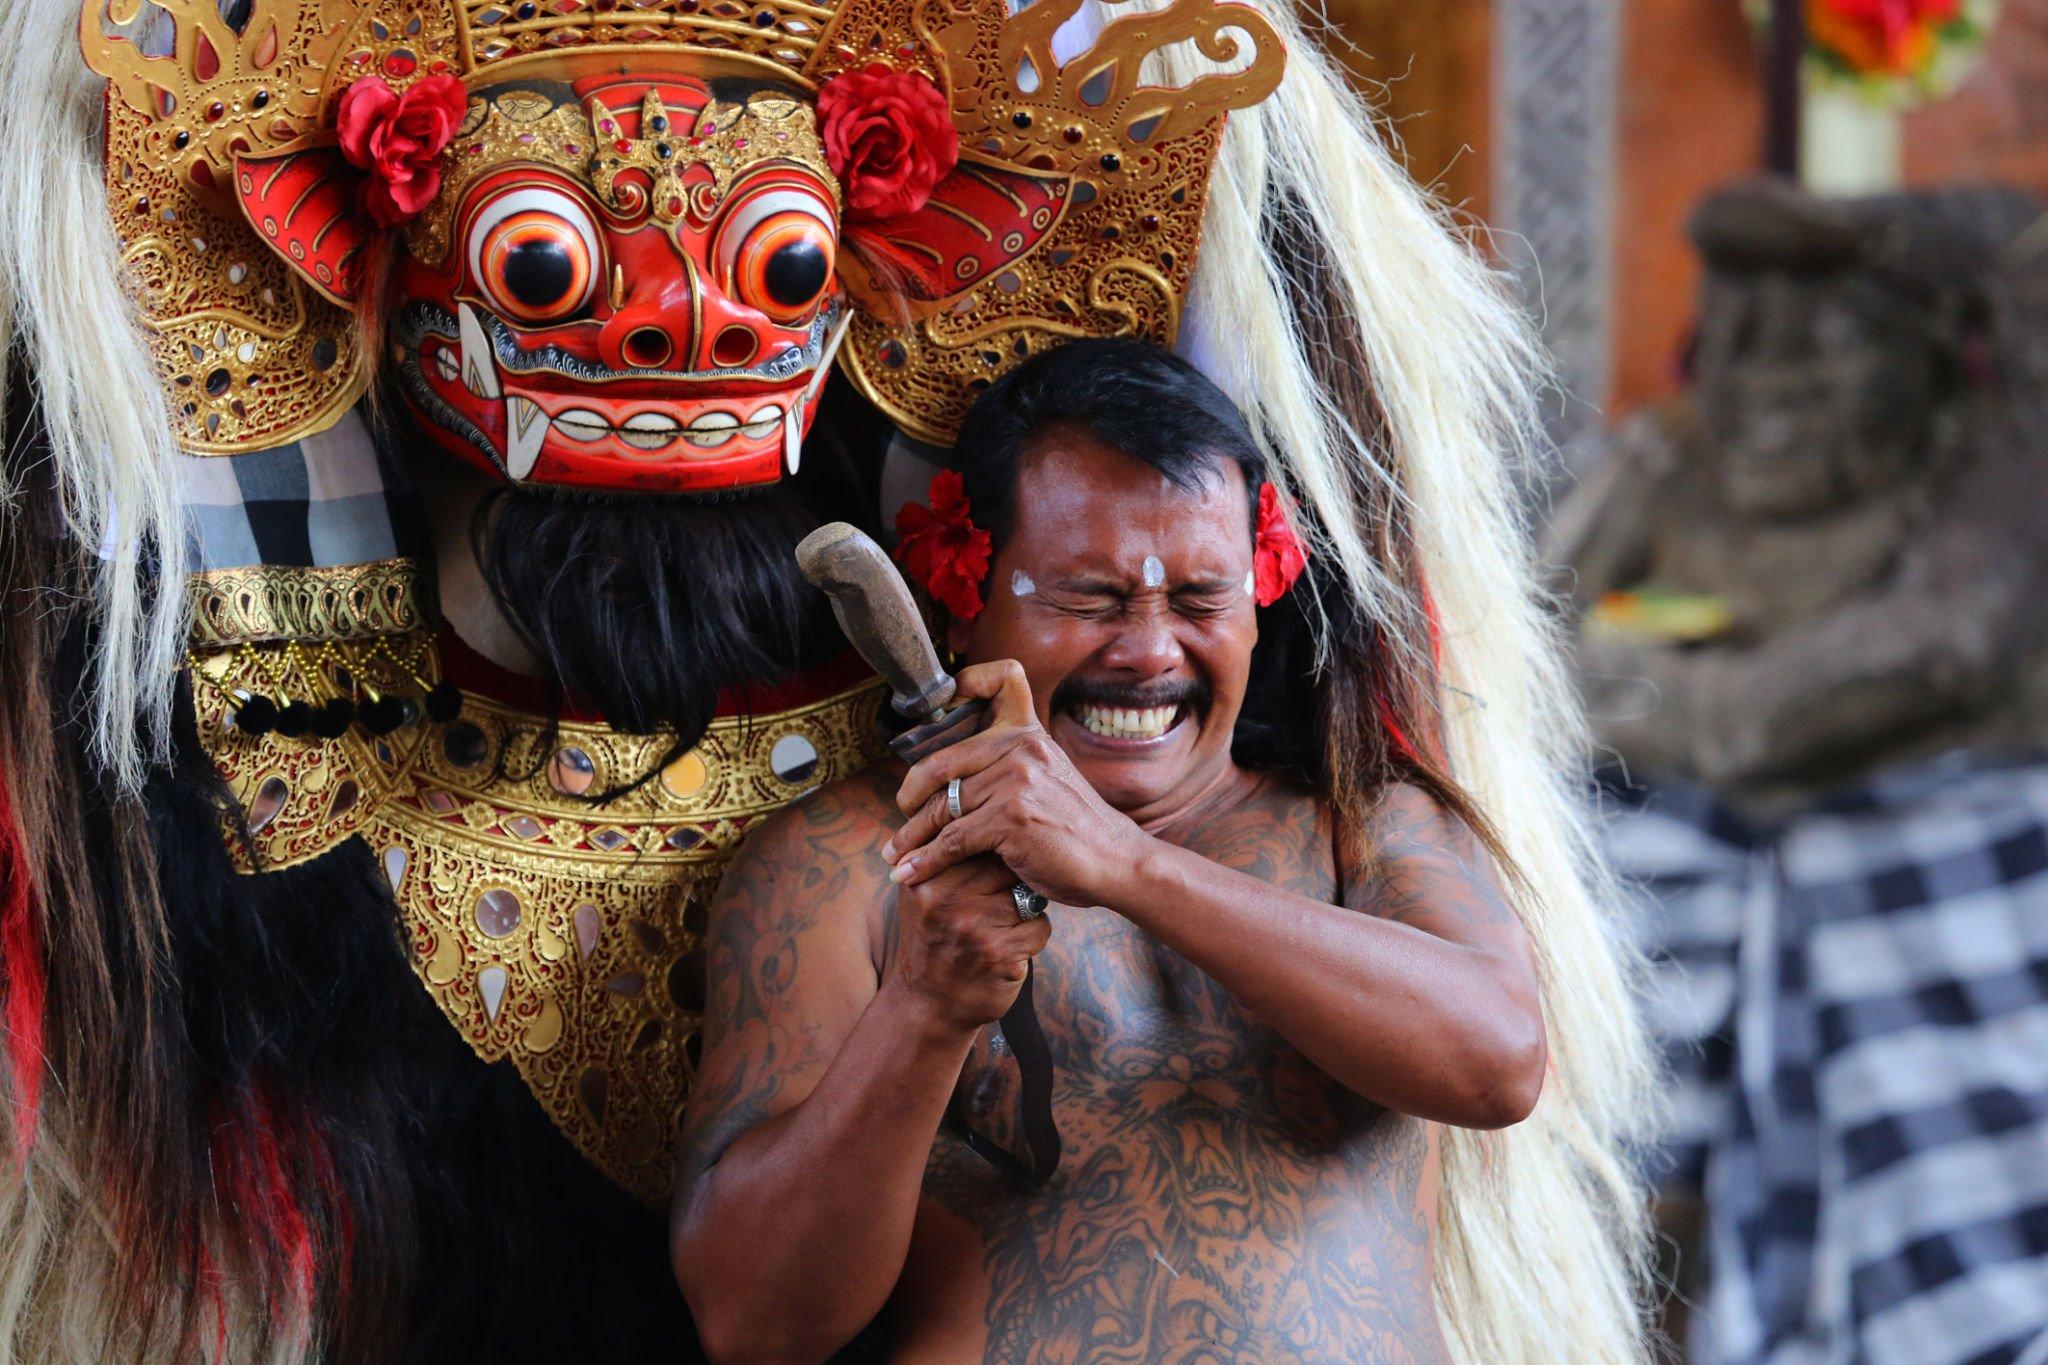 Trance during Barong dance; a common spiritual occurence